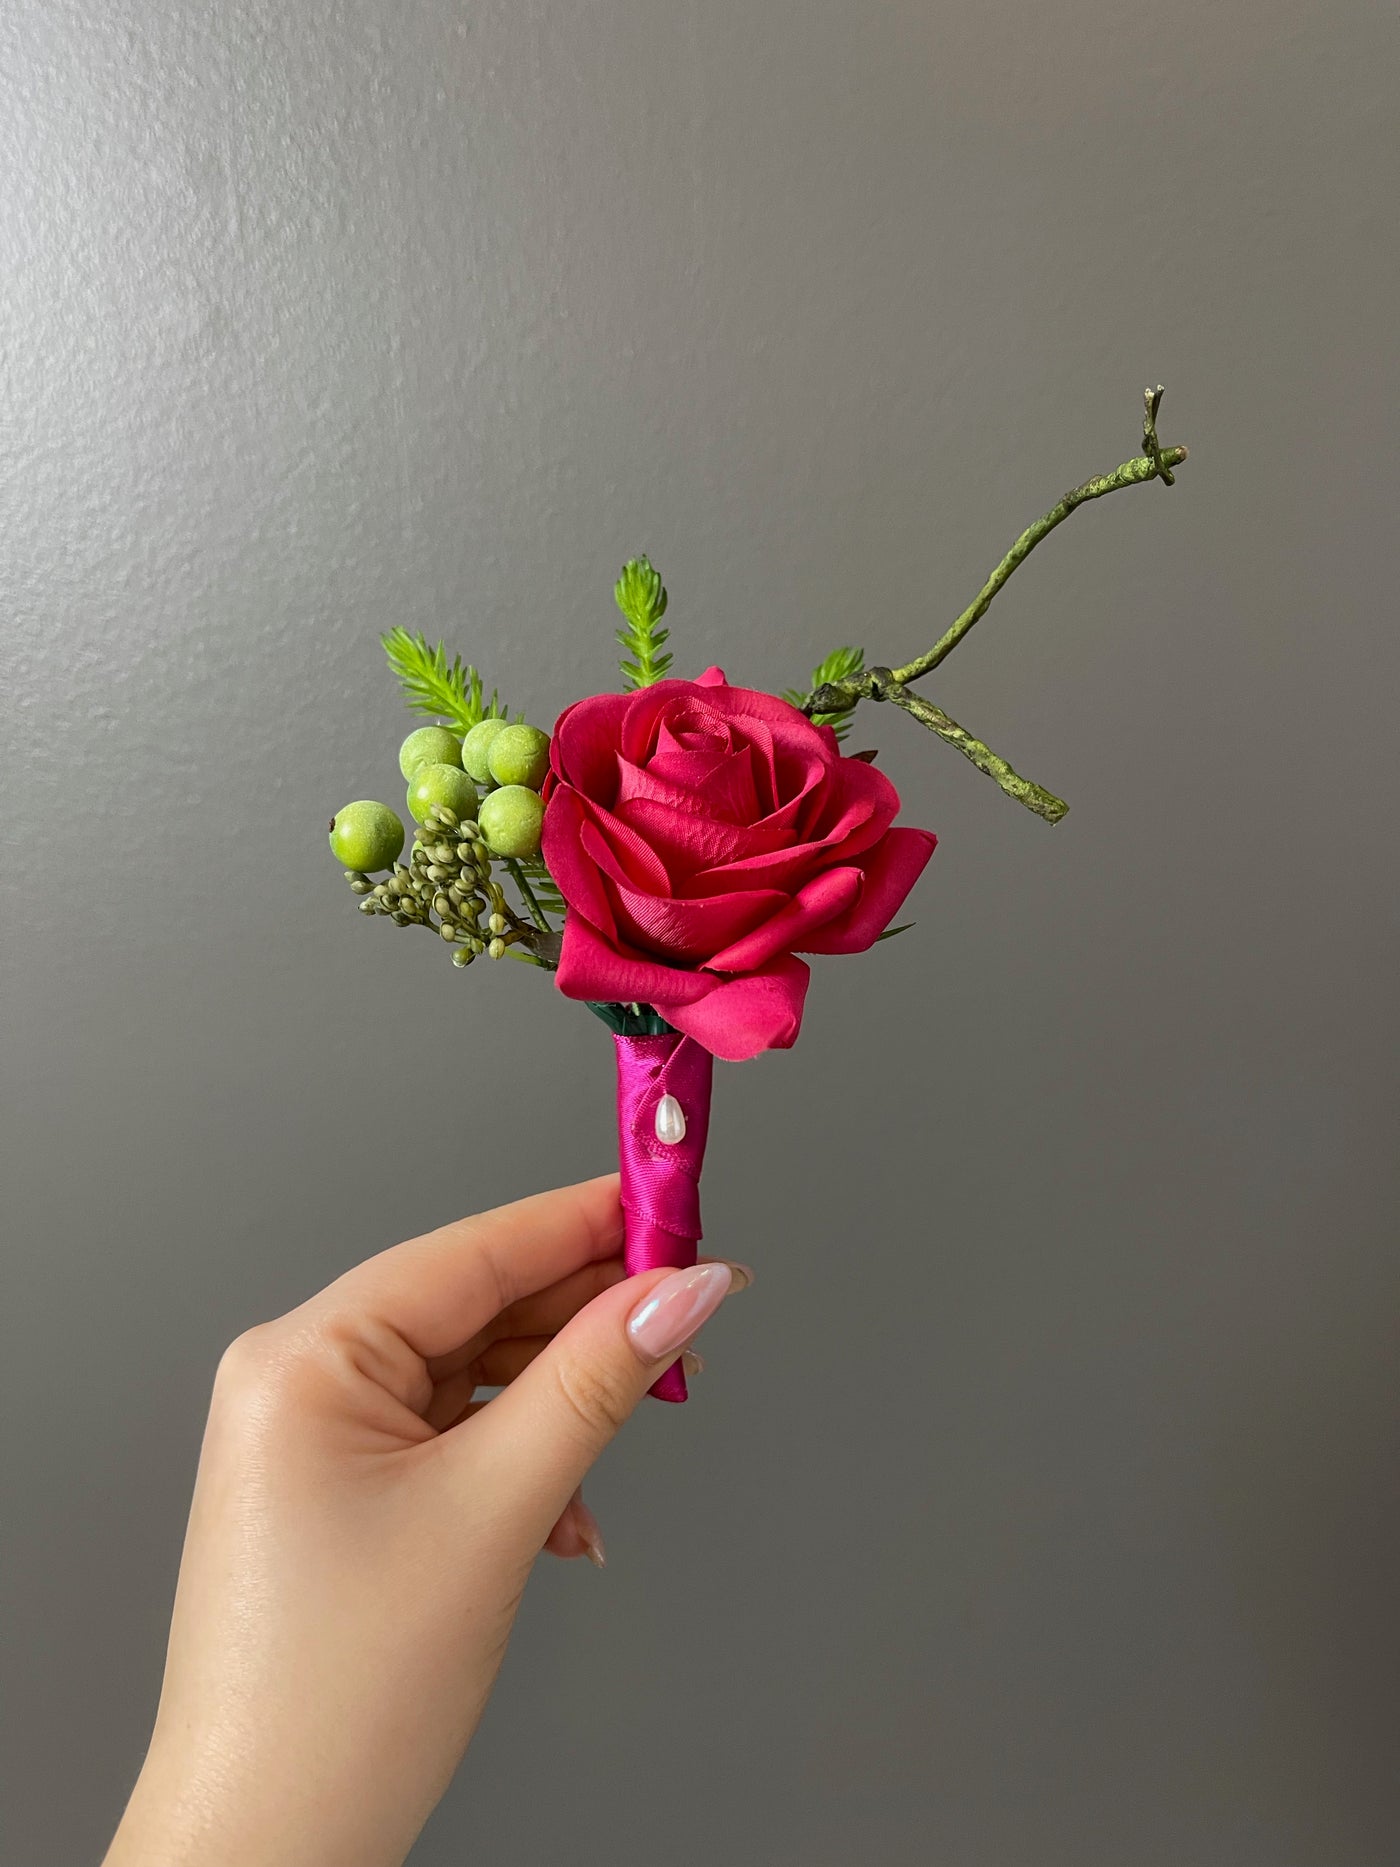 This 6" sophisticated boutonniere features a scarlet rose, green hypericum berries, and assorted foliage. It is secured with satin plum ribbon and a pearl teardrop pin.